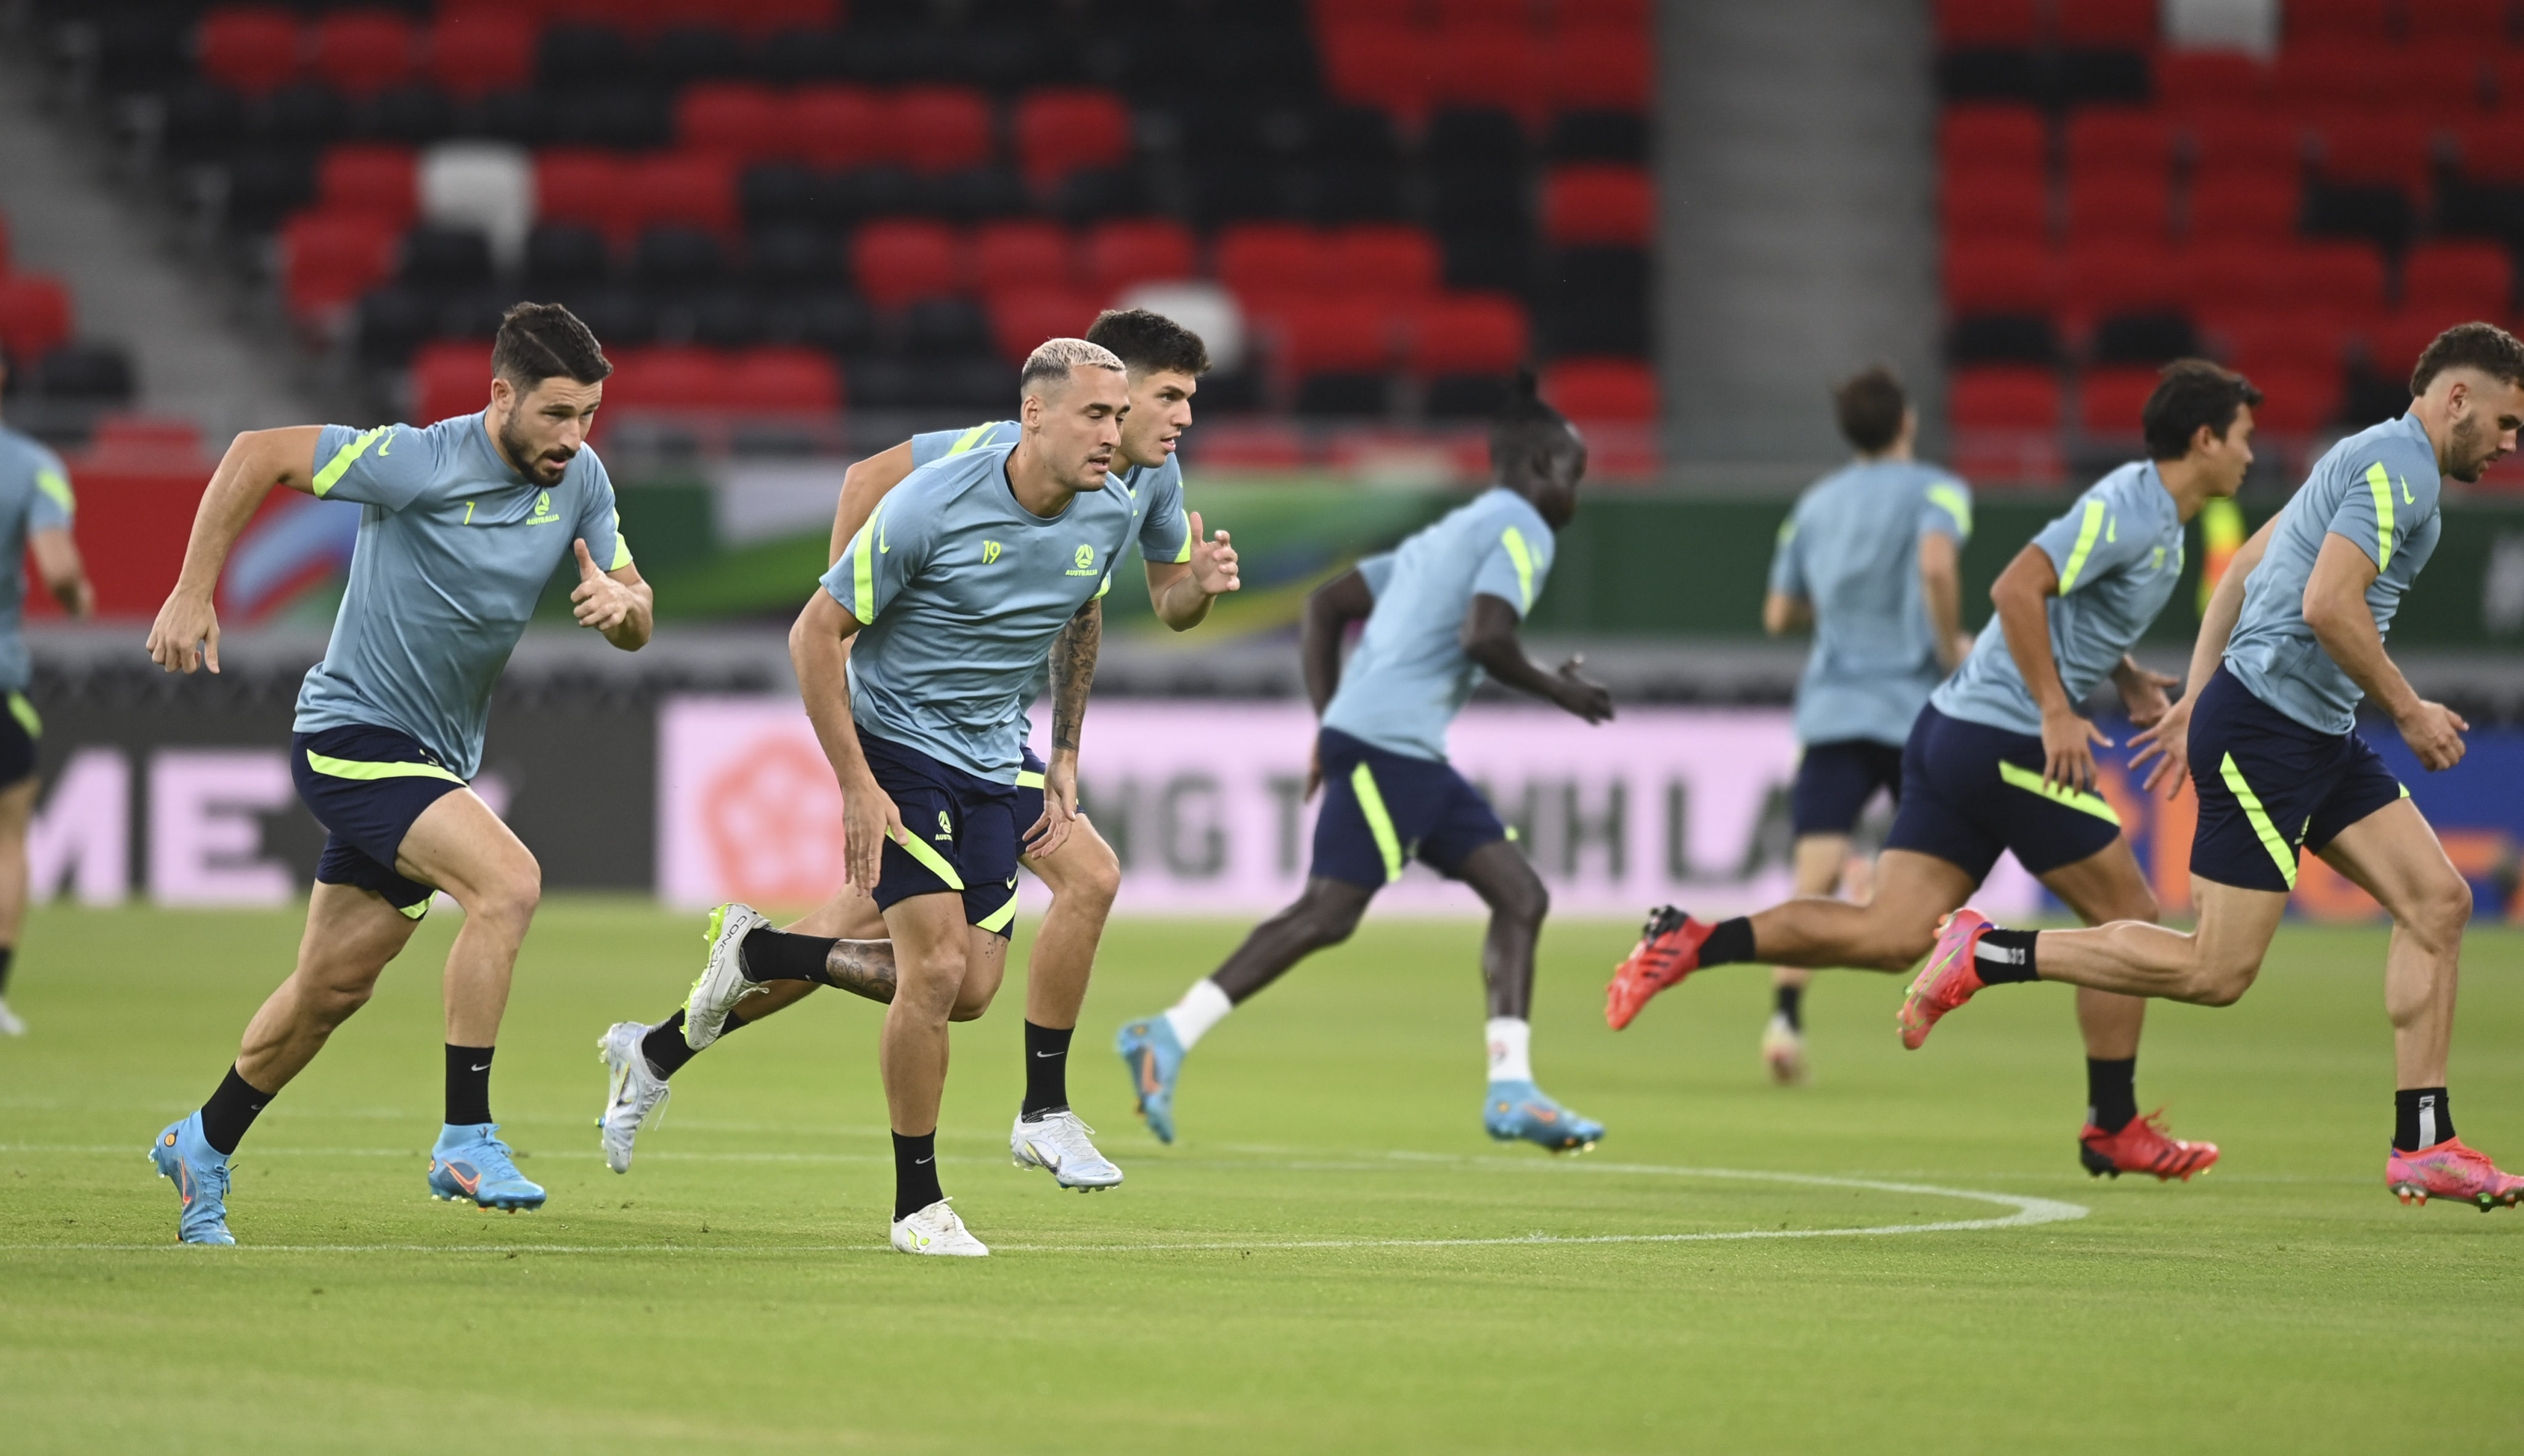 Australian players take part in a training session ahead of the World Cup Asian qualifiers against UAE. Photo: Xinhua